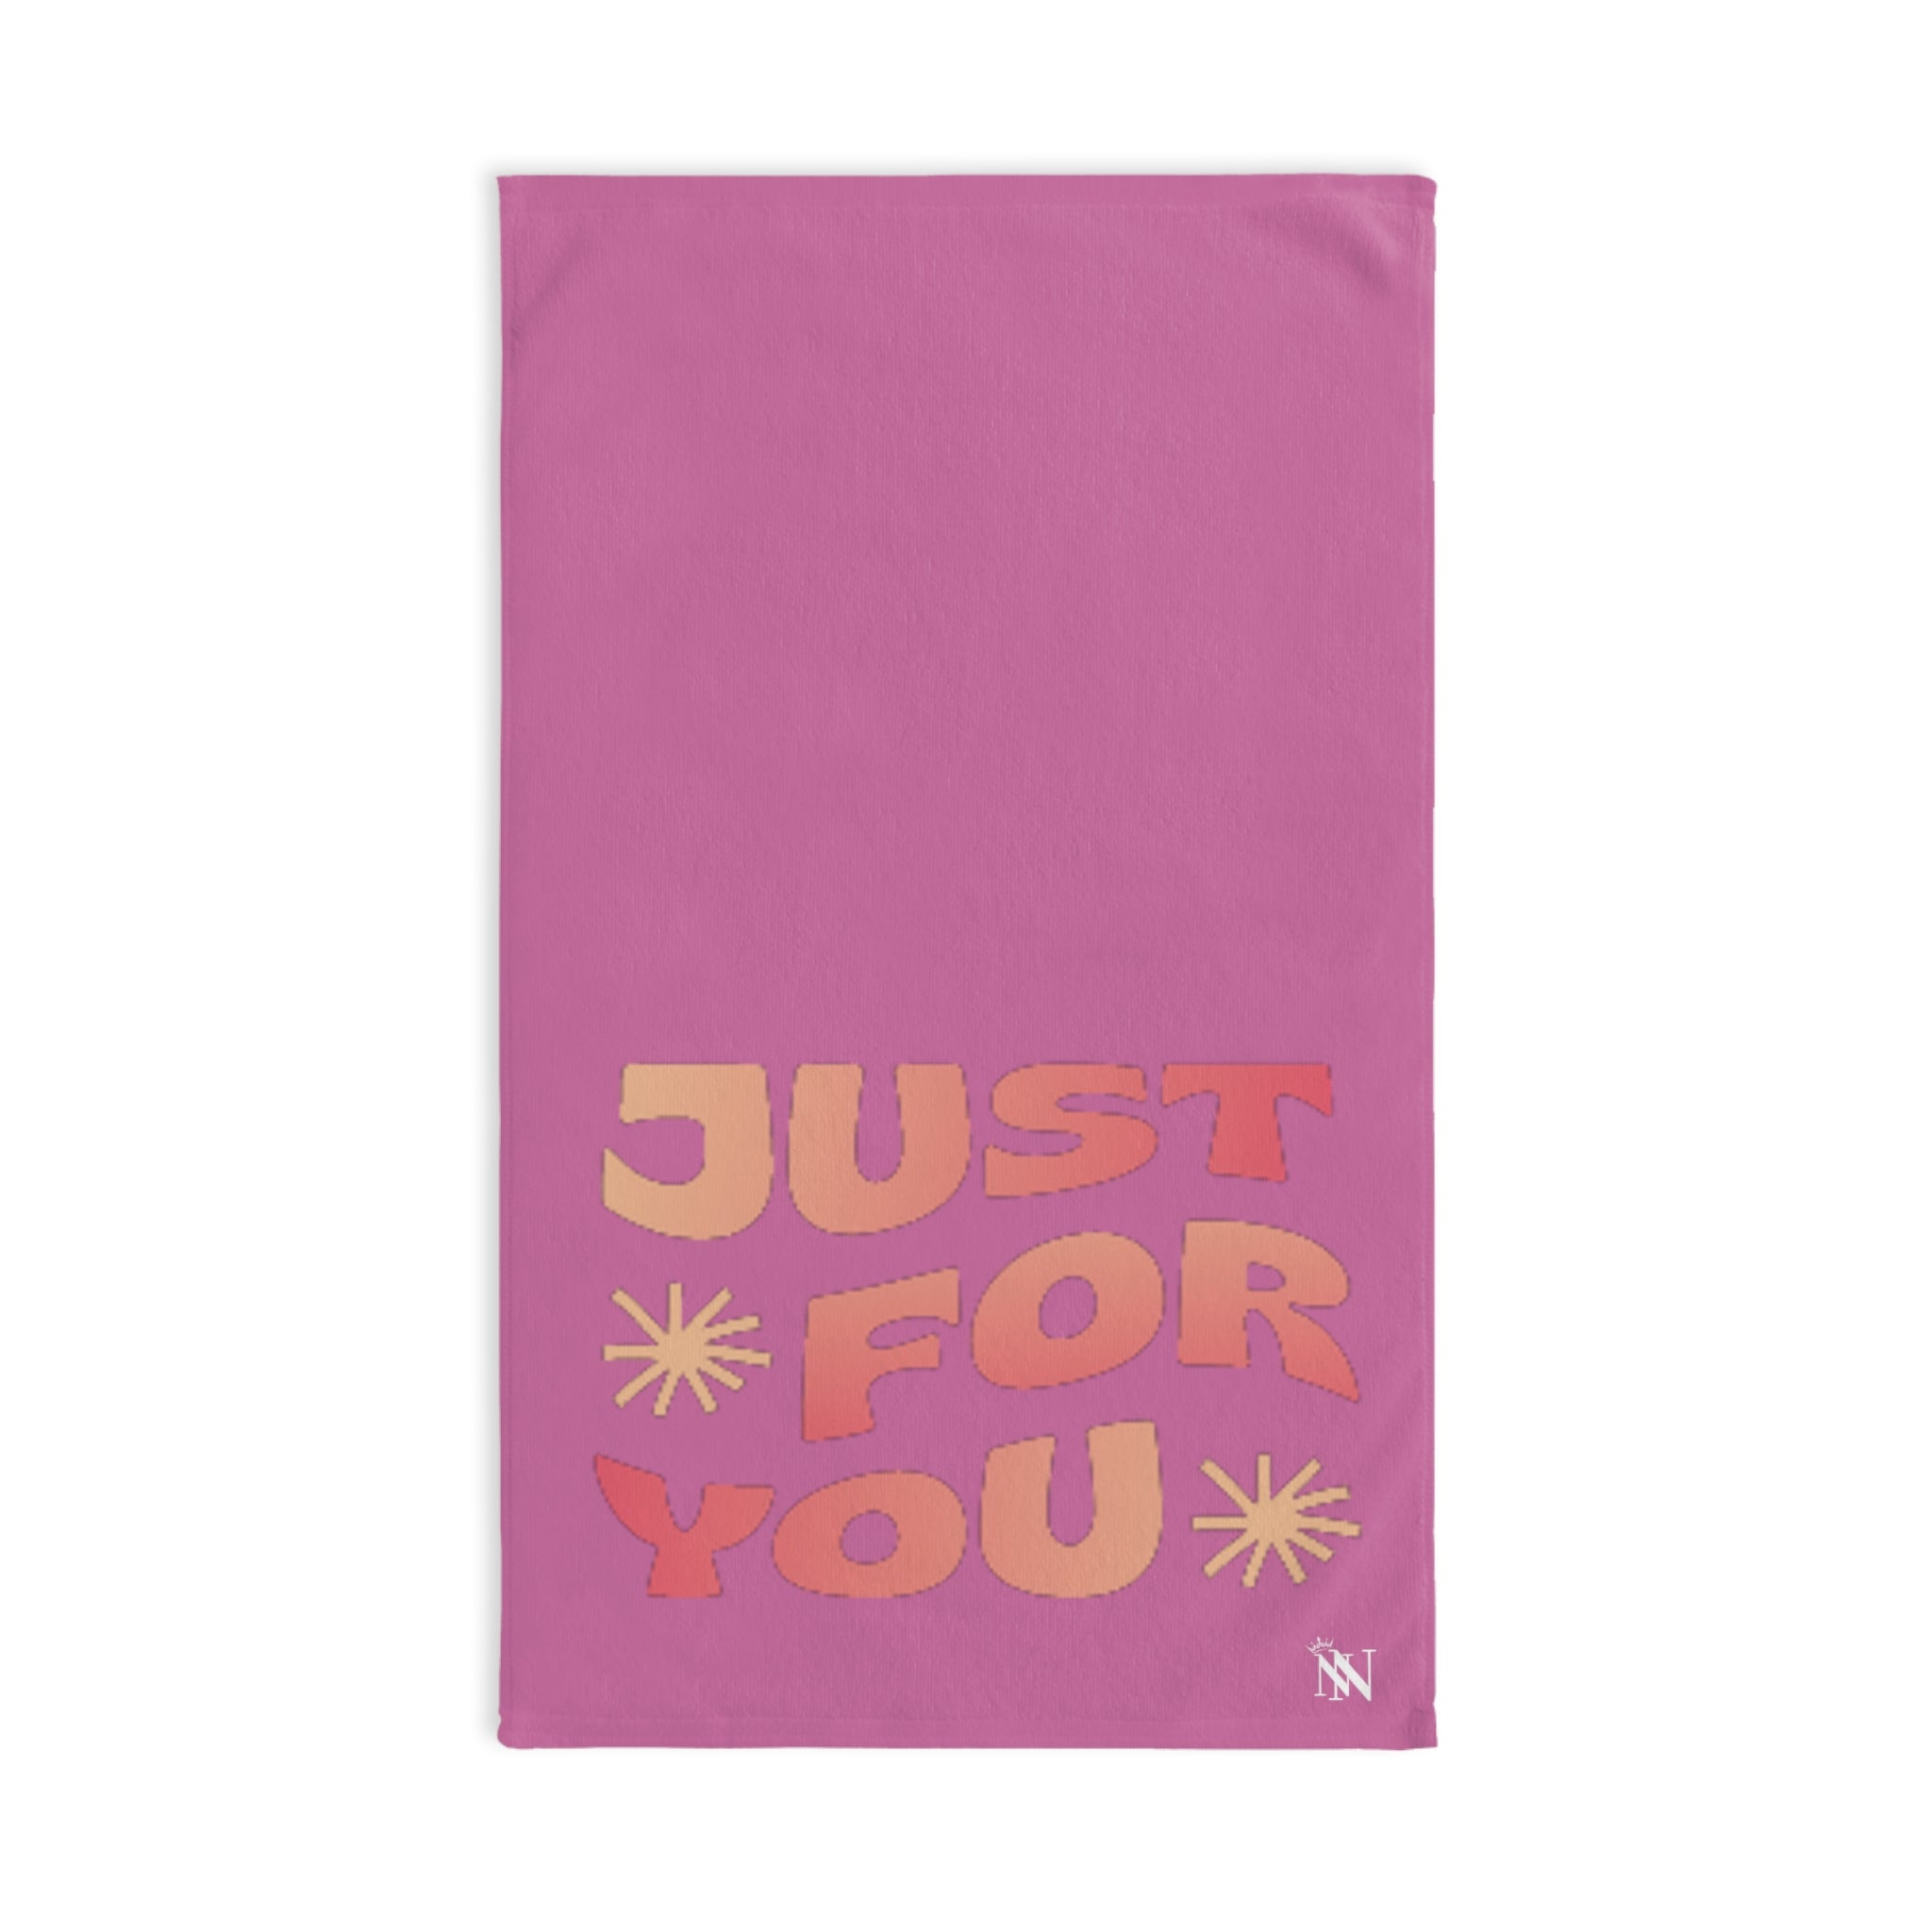 Just For YouPink | Novelty Gifts for Boyfriend, Funny Towel Romantic Gift for Wedding Couple Fiance First Year Anniversary Valentines, Party Gag Gifts, Joke Humor Cloth for Husband Men BF NECTAR NAPKINS